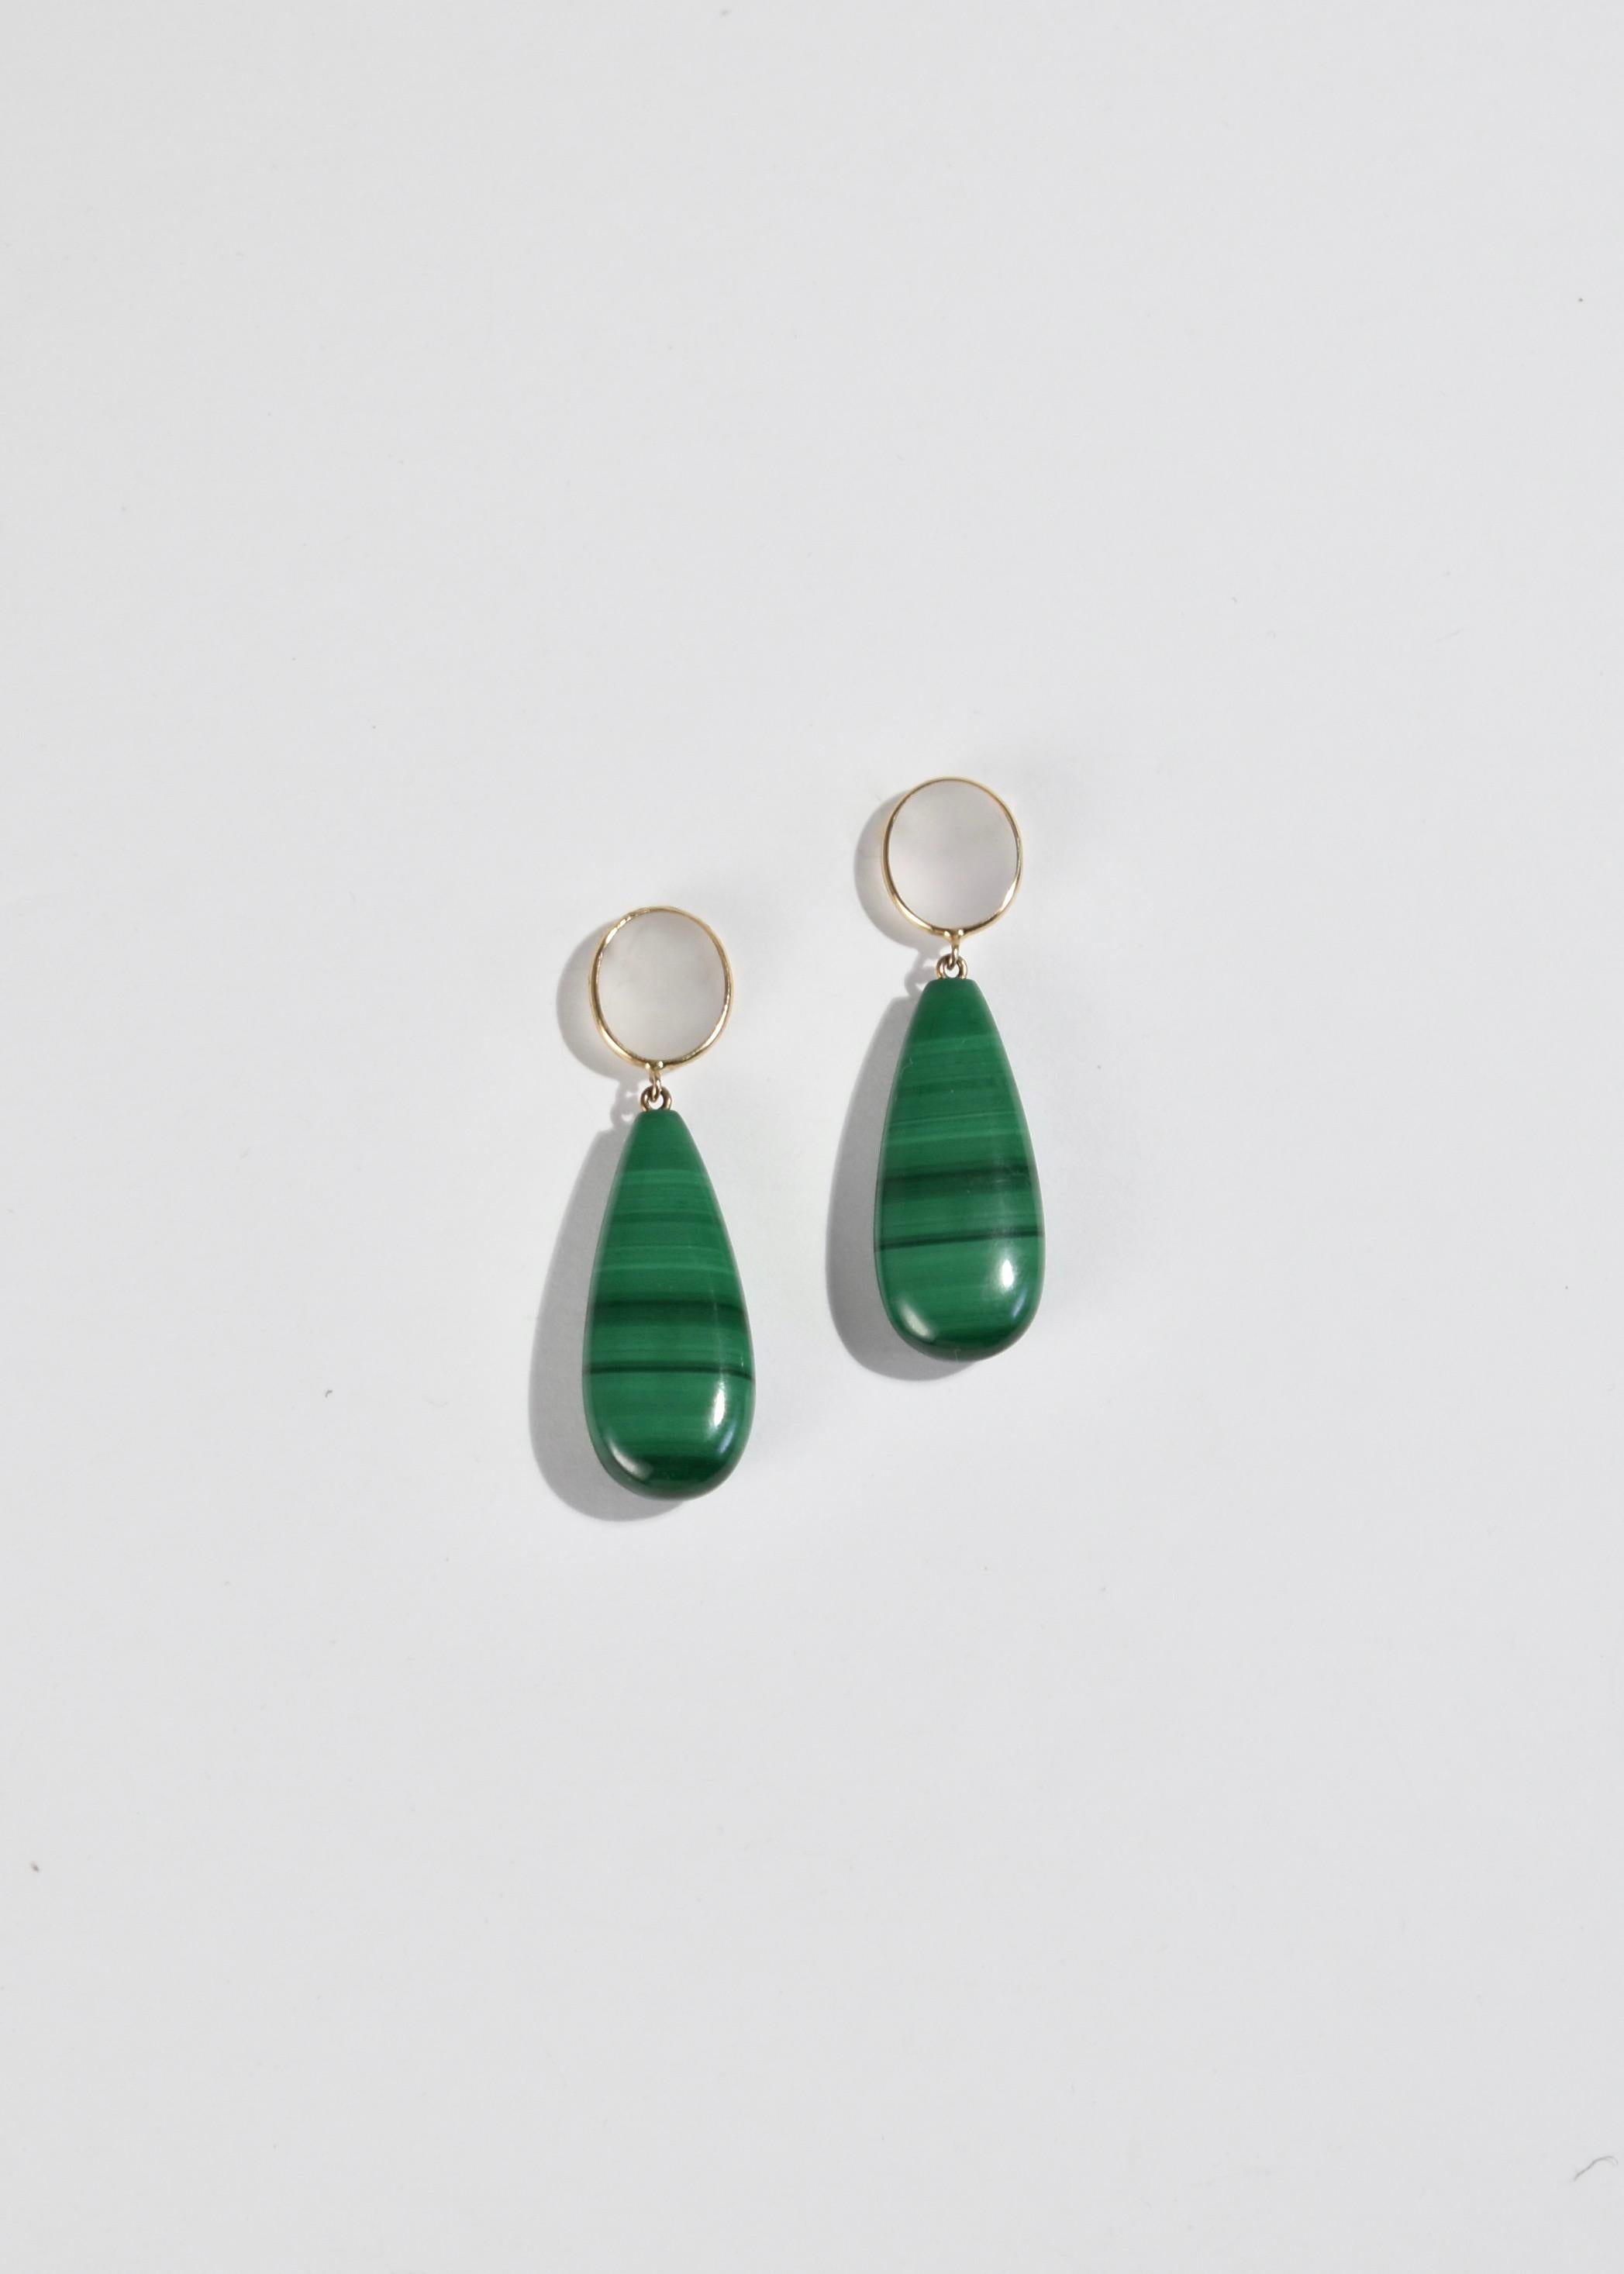 Crystal Malachite Earrings In Excellent Condition For Sale In Richmond, VA